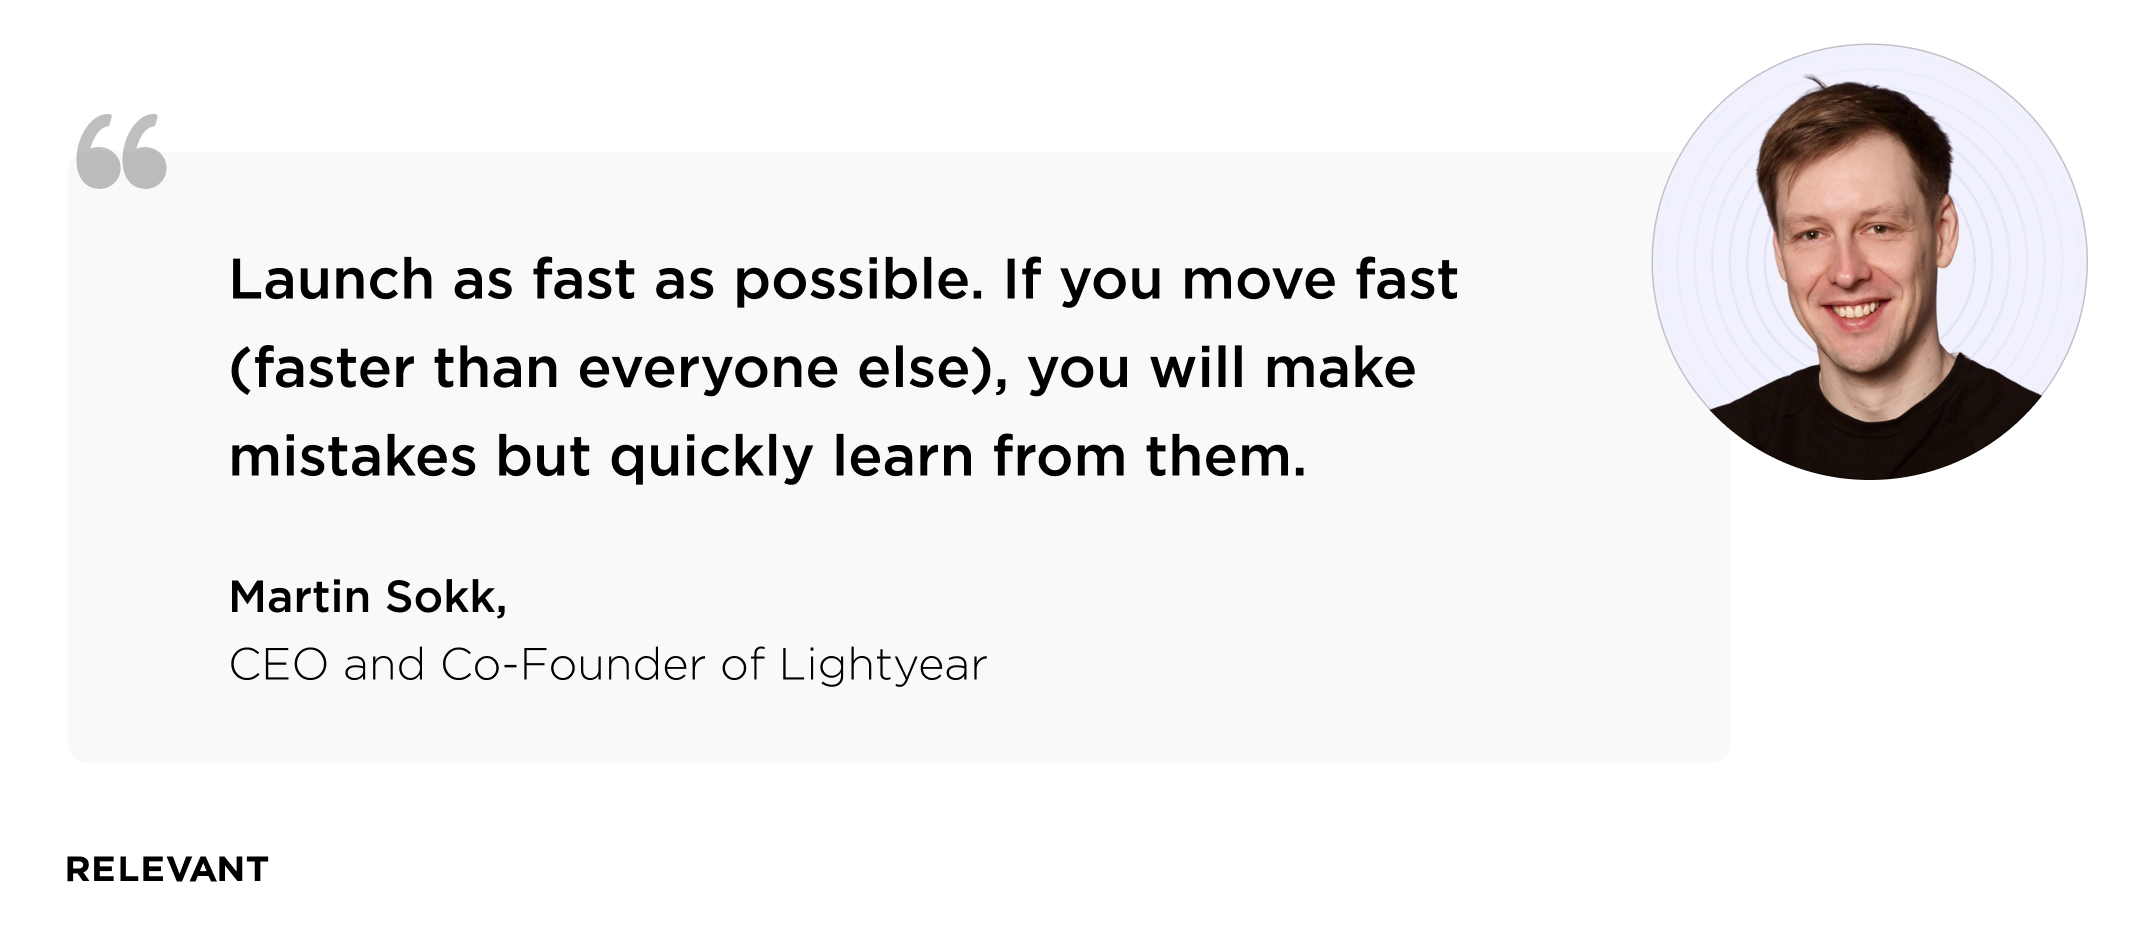 “Launch as fast as possible. If you move fast (faster than everyone else), you will make mistakes but quickly learn from them.” Martin Sokk, CEO and co-founder of  Lightyear